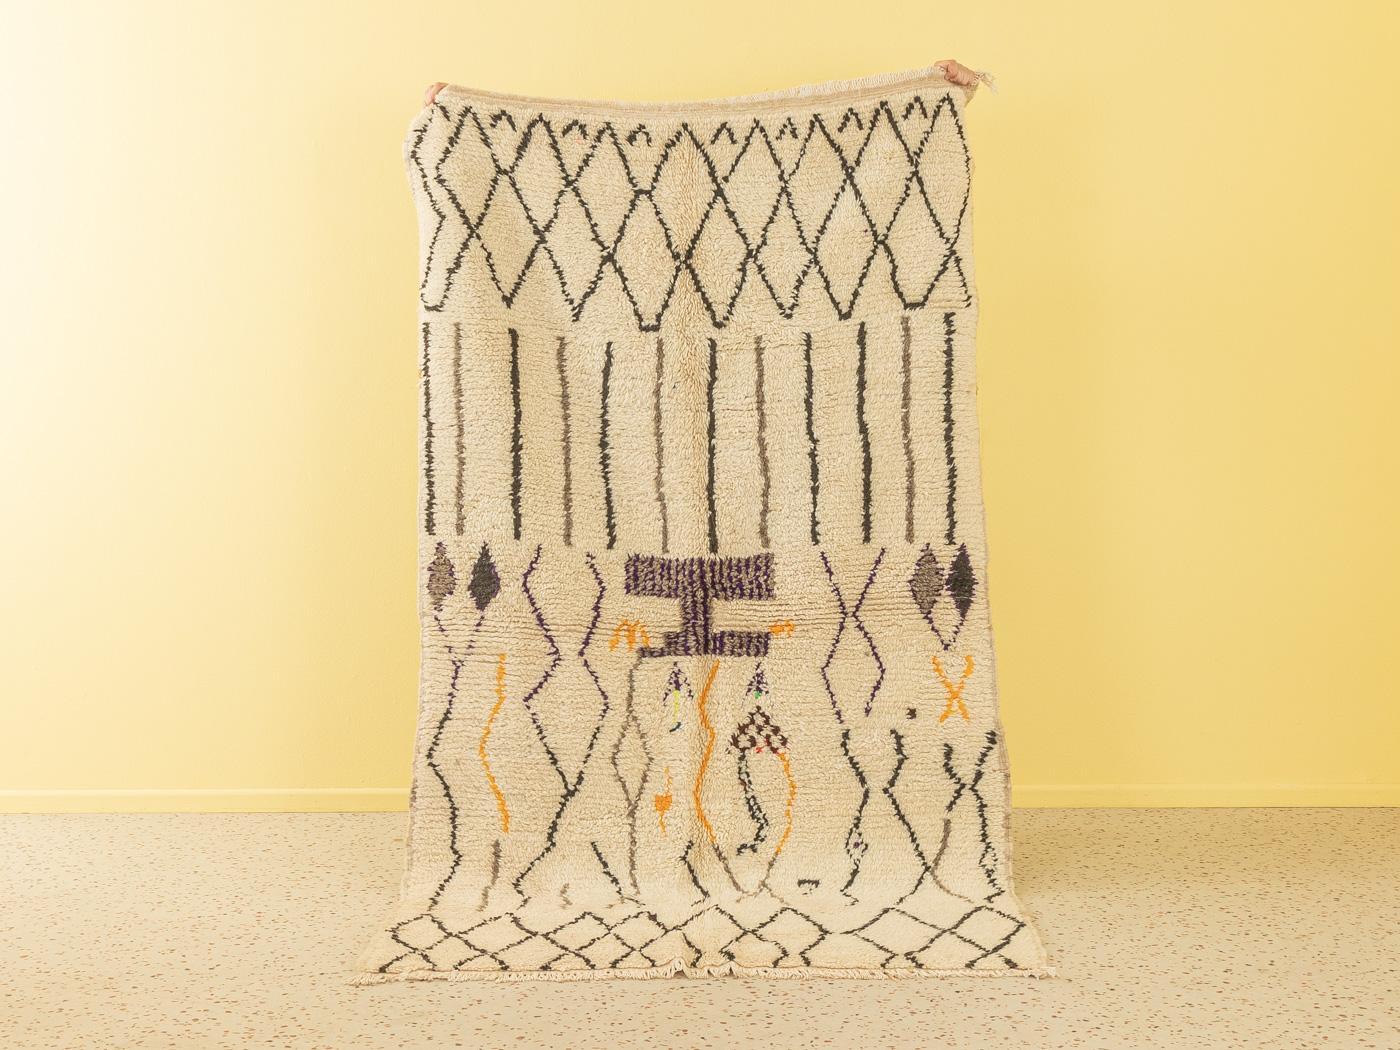 This Vintage Azilal is a 100 % wool rug – soft and comfortable underfoot. Our Berber rugs are handmade, one knot at a time. Each of our Berber rugs is a long-lasting one-of-a-kind piece, created in a sustainable manner with local wool.

Vintage